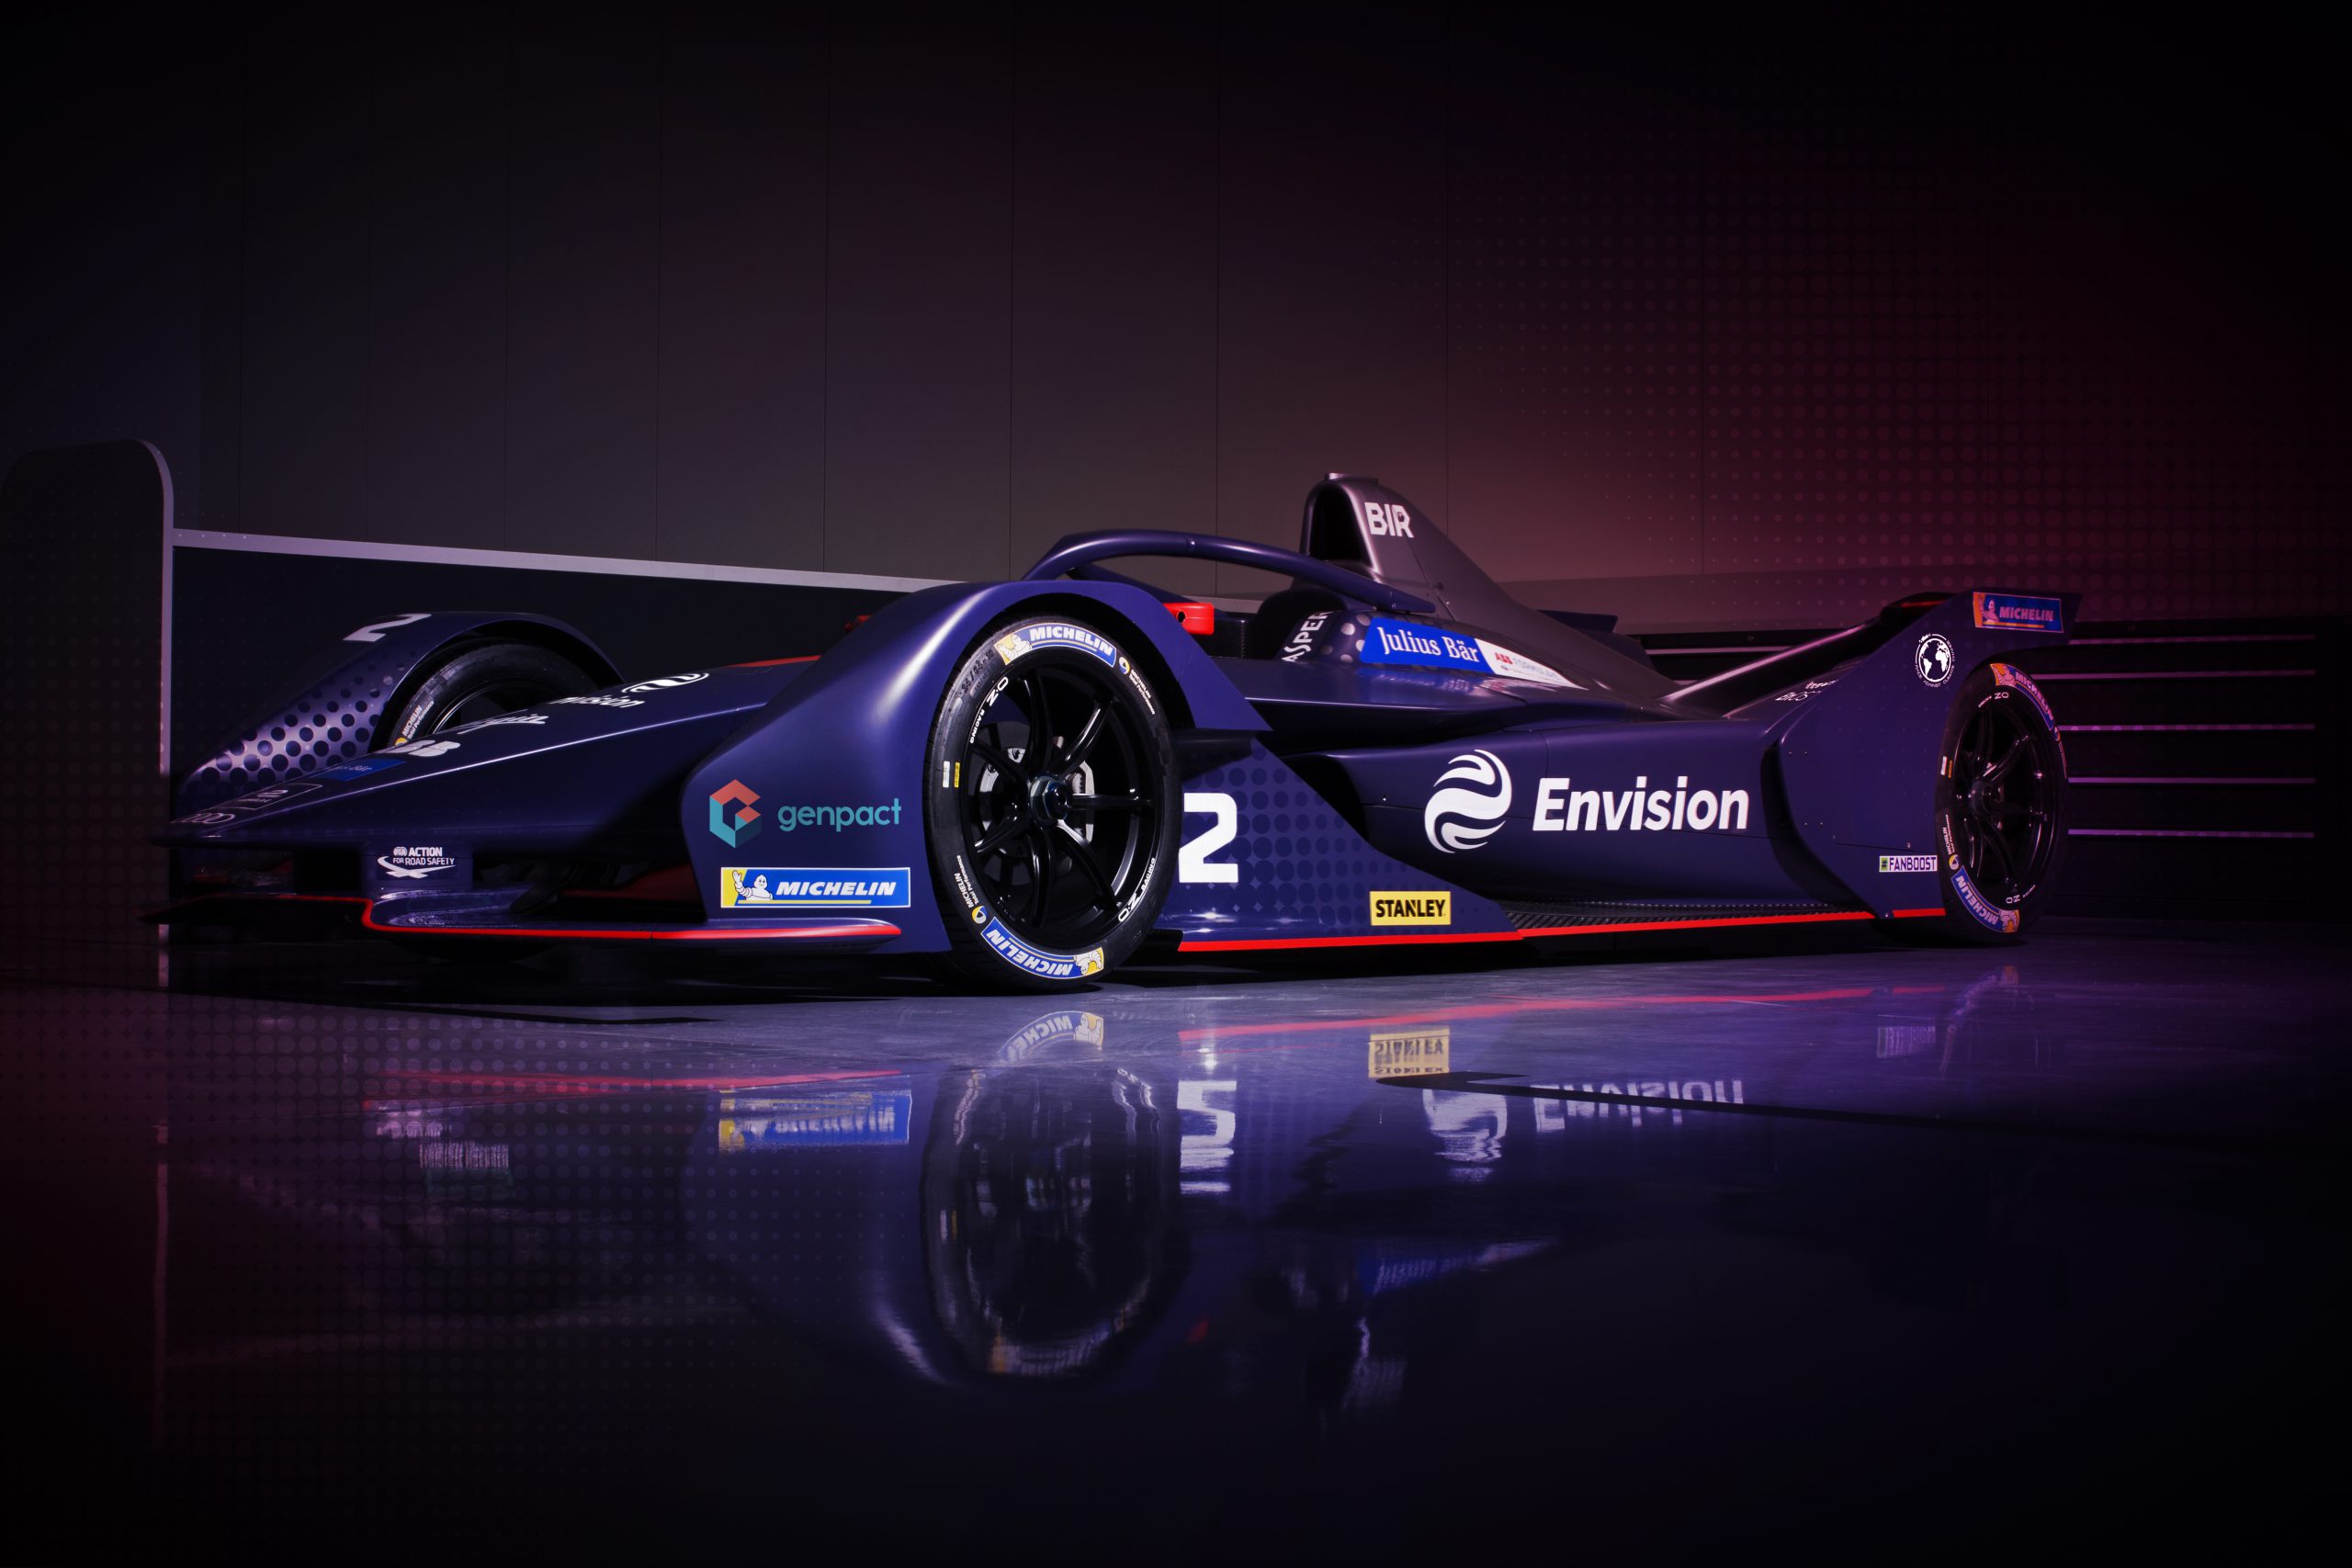 How Genpact Helps Envision Virgin Racing Make Lightening Fast Decisions